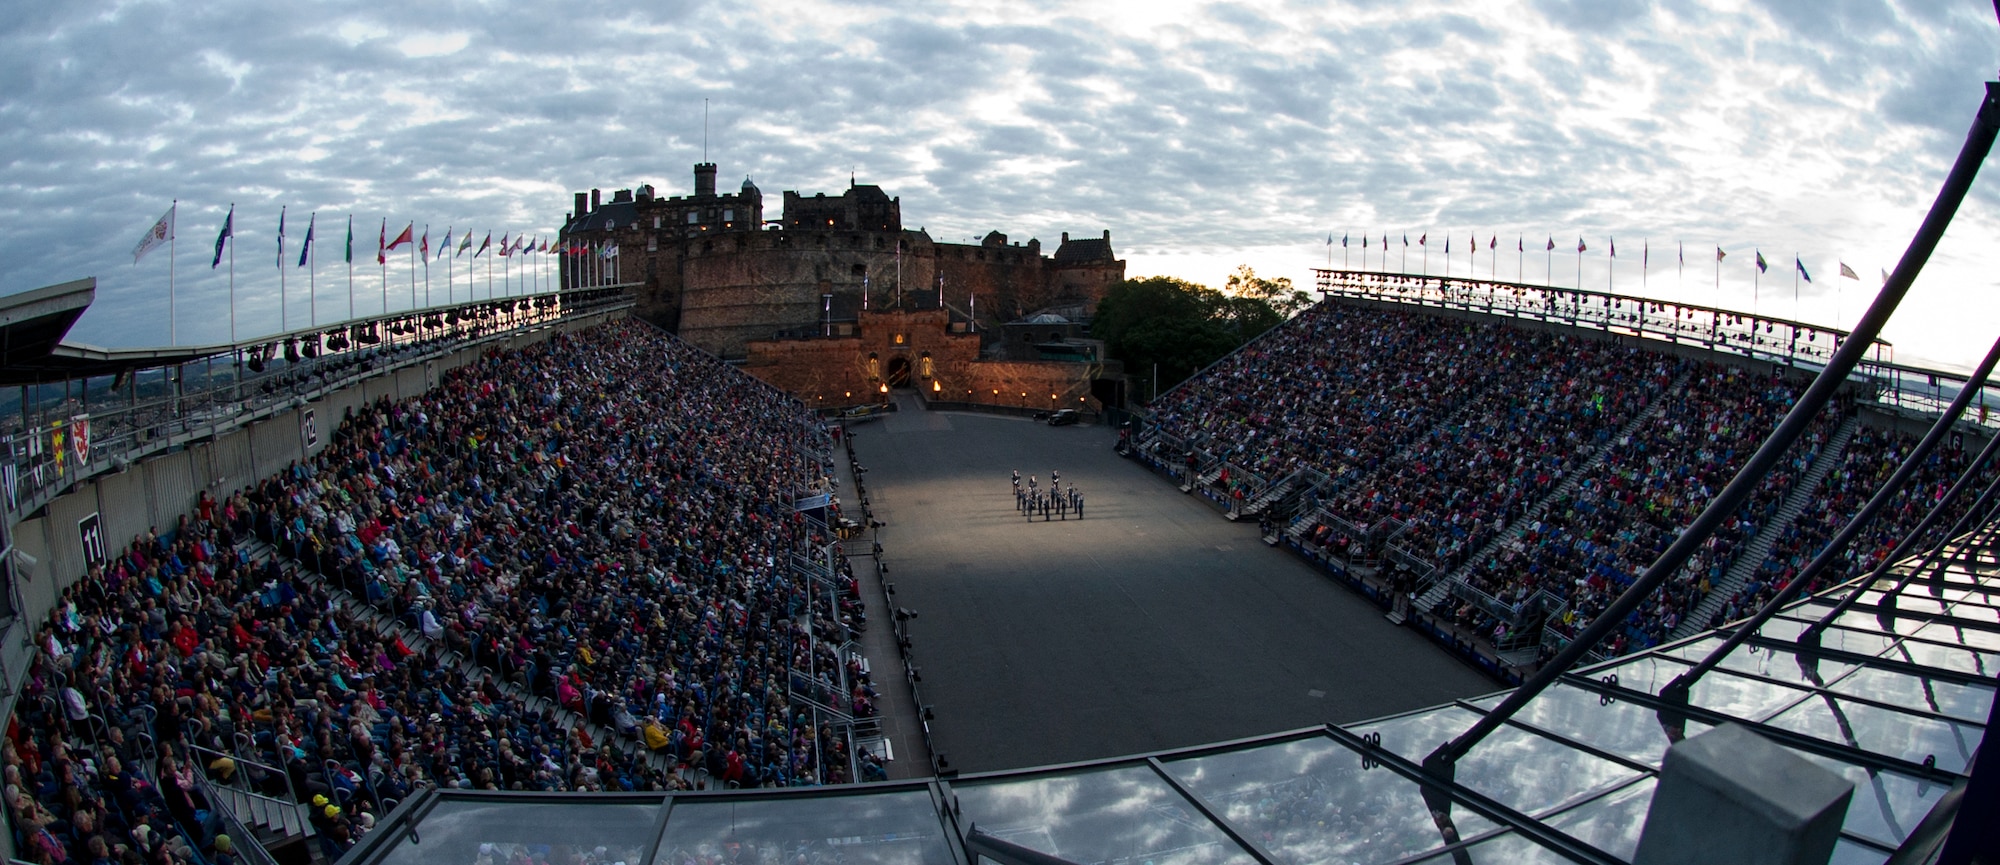 The United States Air Force Honor Guard Drill Team performs for thousands of people during The Royal Edinburgh Military Tattoo on the Esplanade of the Edinburgh Castle in Edinburgh, Scotland Aug. 7, 2015. The 66th production of the tattoo welcomes more than 220,000 spectators from around the world for more than 3 weeks. The event includes 17 acts for 25 performances and welcomes more than 1,390 performers from the US, Europe, Asia, Australia and Canada. The show features Bollywood dancers from India, the Military Band of the People’s Liberation Army of China, the Top Secret Drum Corps from Switzerland, the Royal Air Force and Queen’s Colour Squadron Mass Band and more. (U.S. Air Force photo/Staff Sgt. Nichelle Anderson/Released)